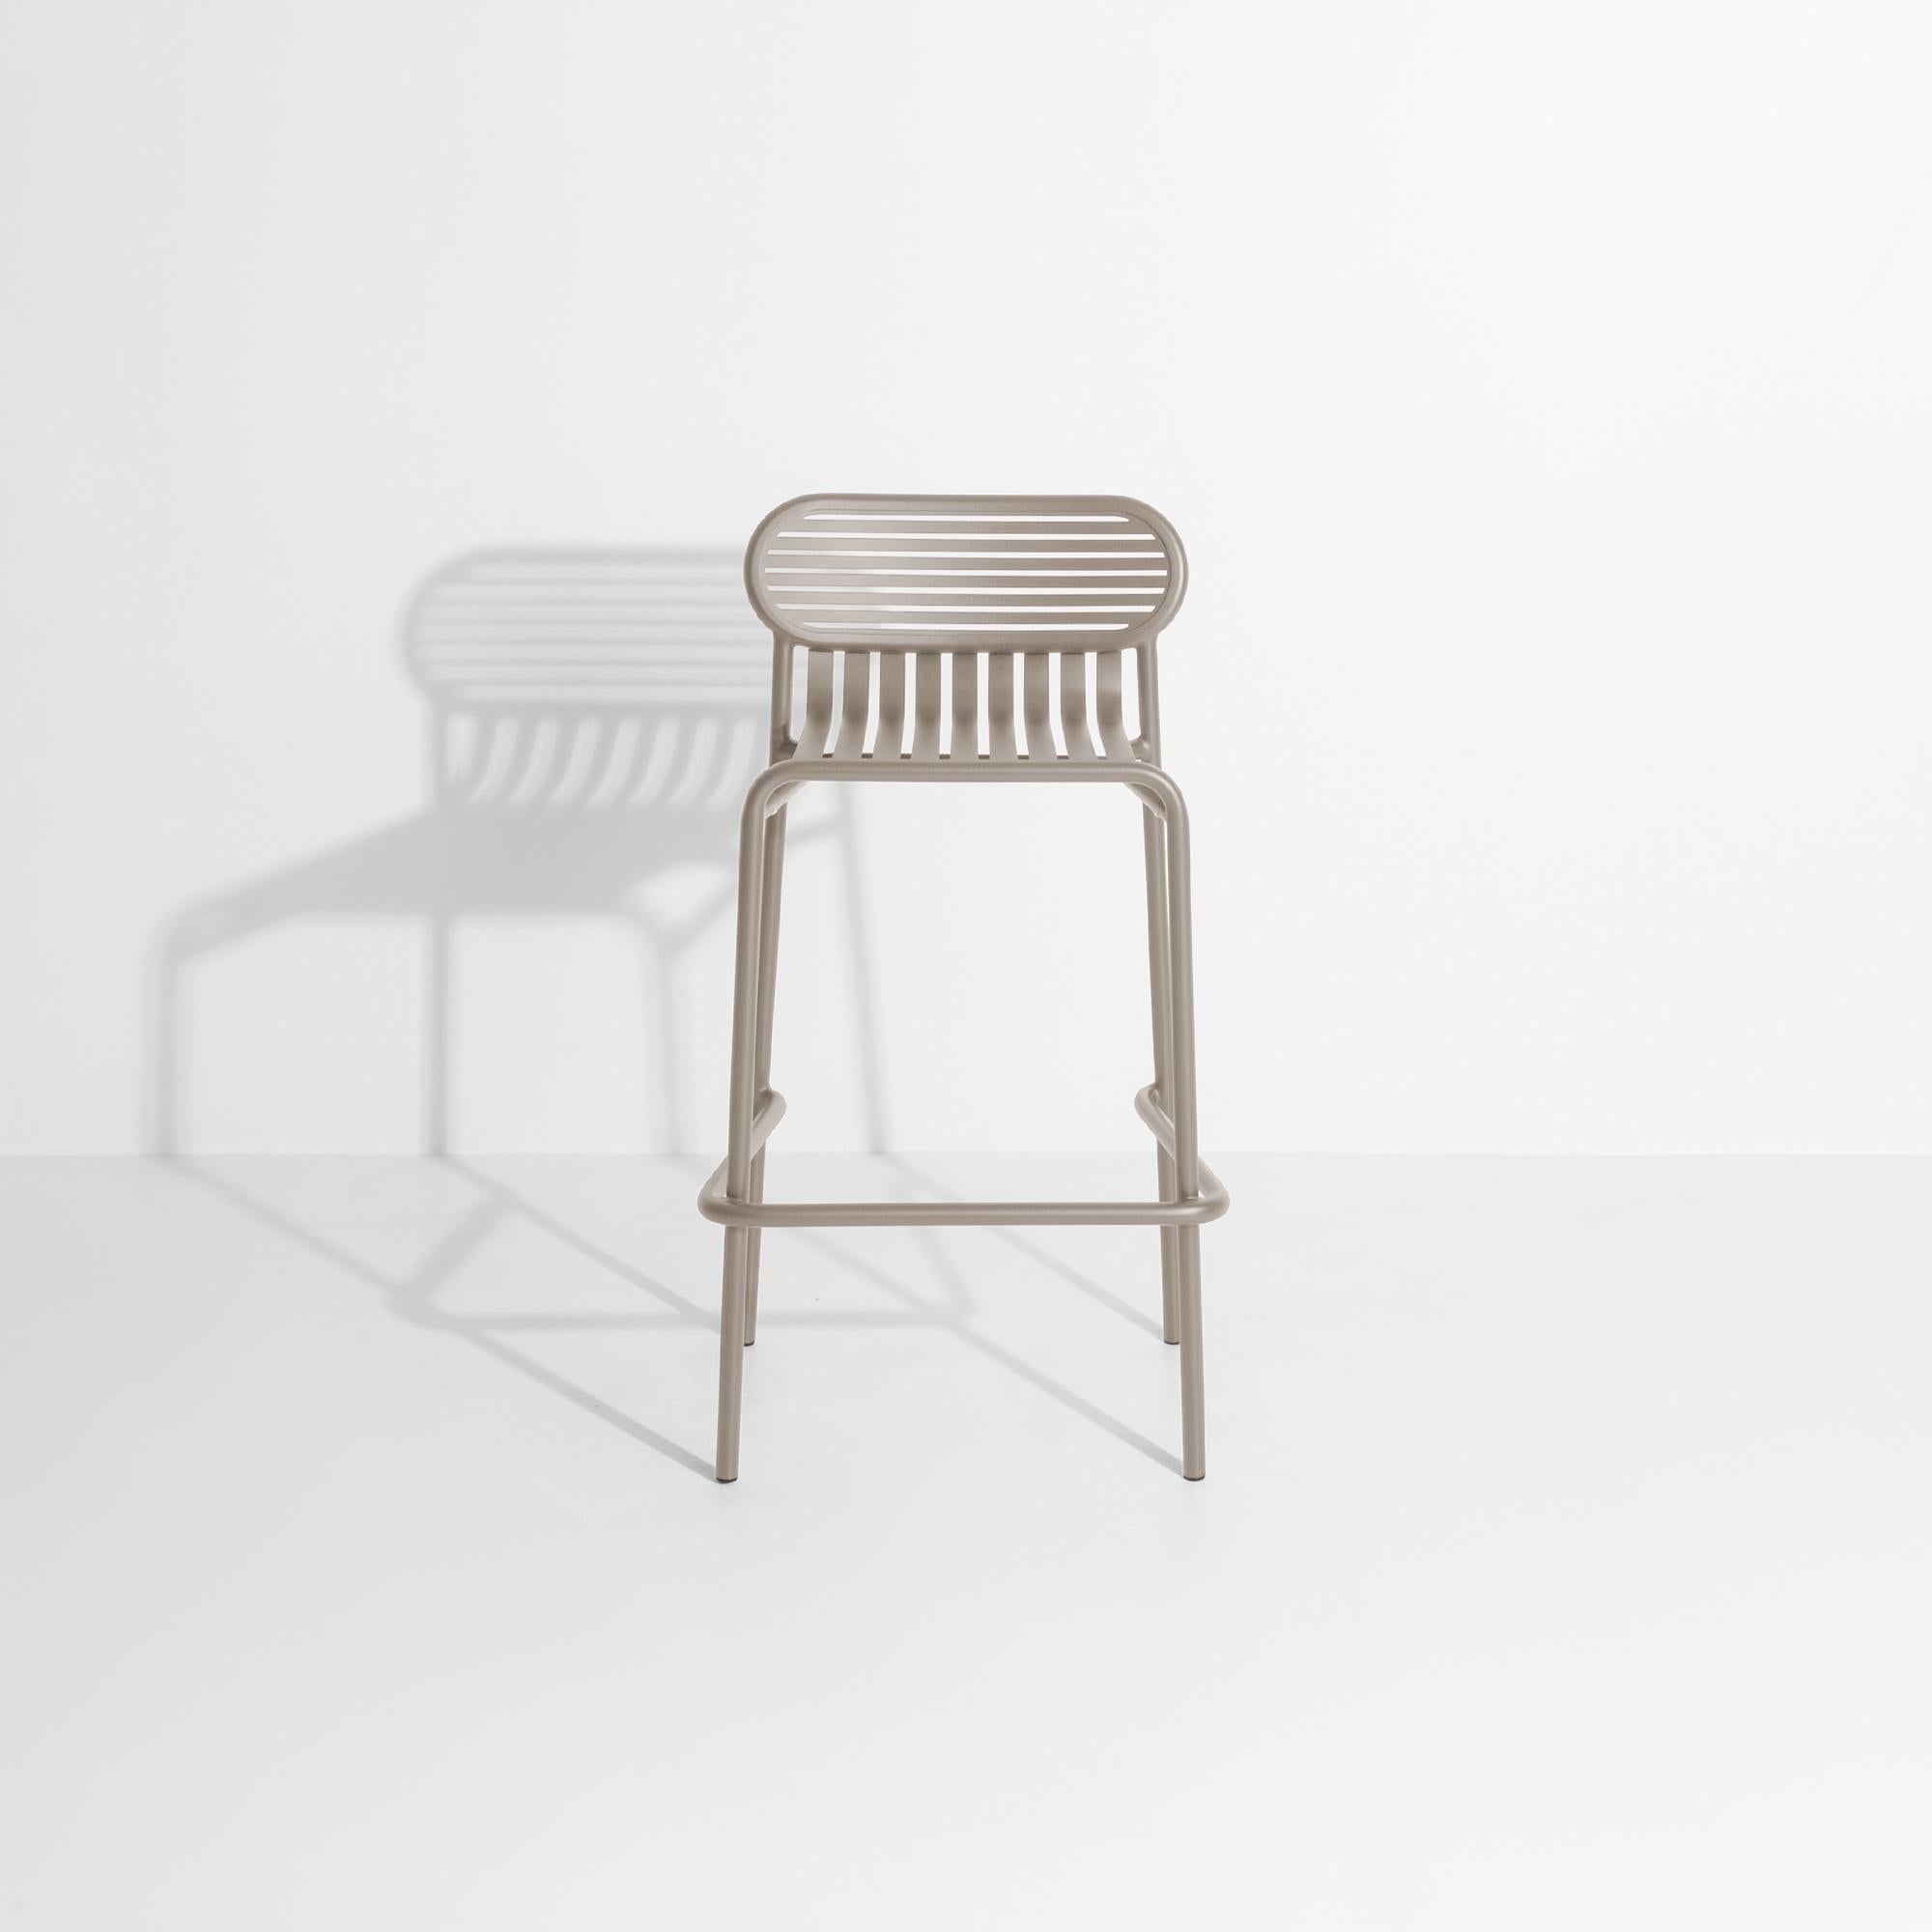 Chinese Petite Friture Week-End Bar Stool in Dune Aluminium by Studio BrichetZiegler For Sale